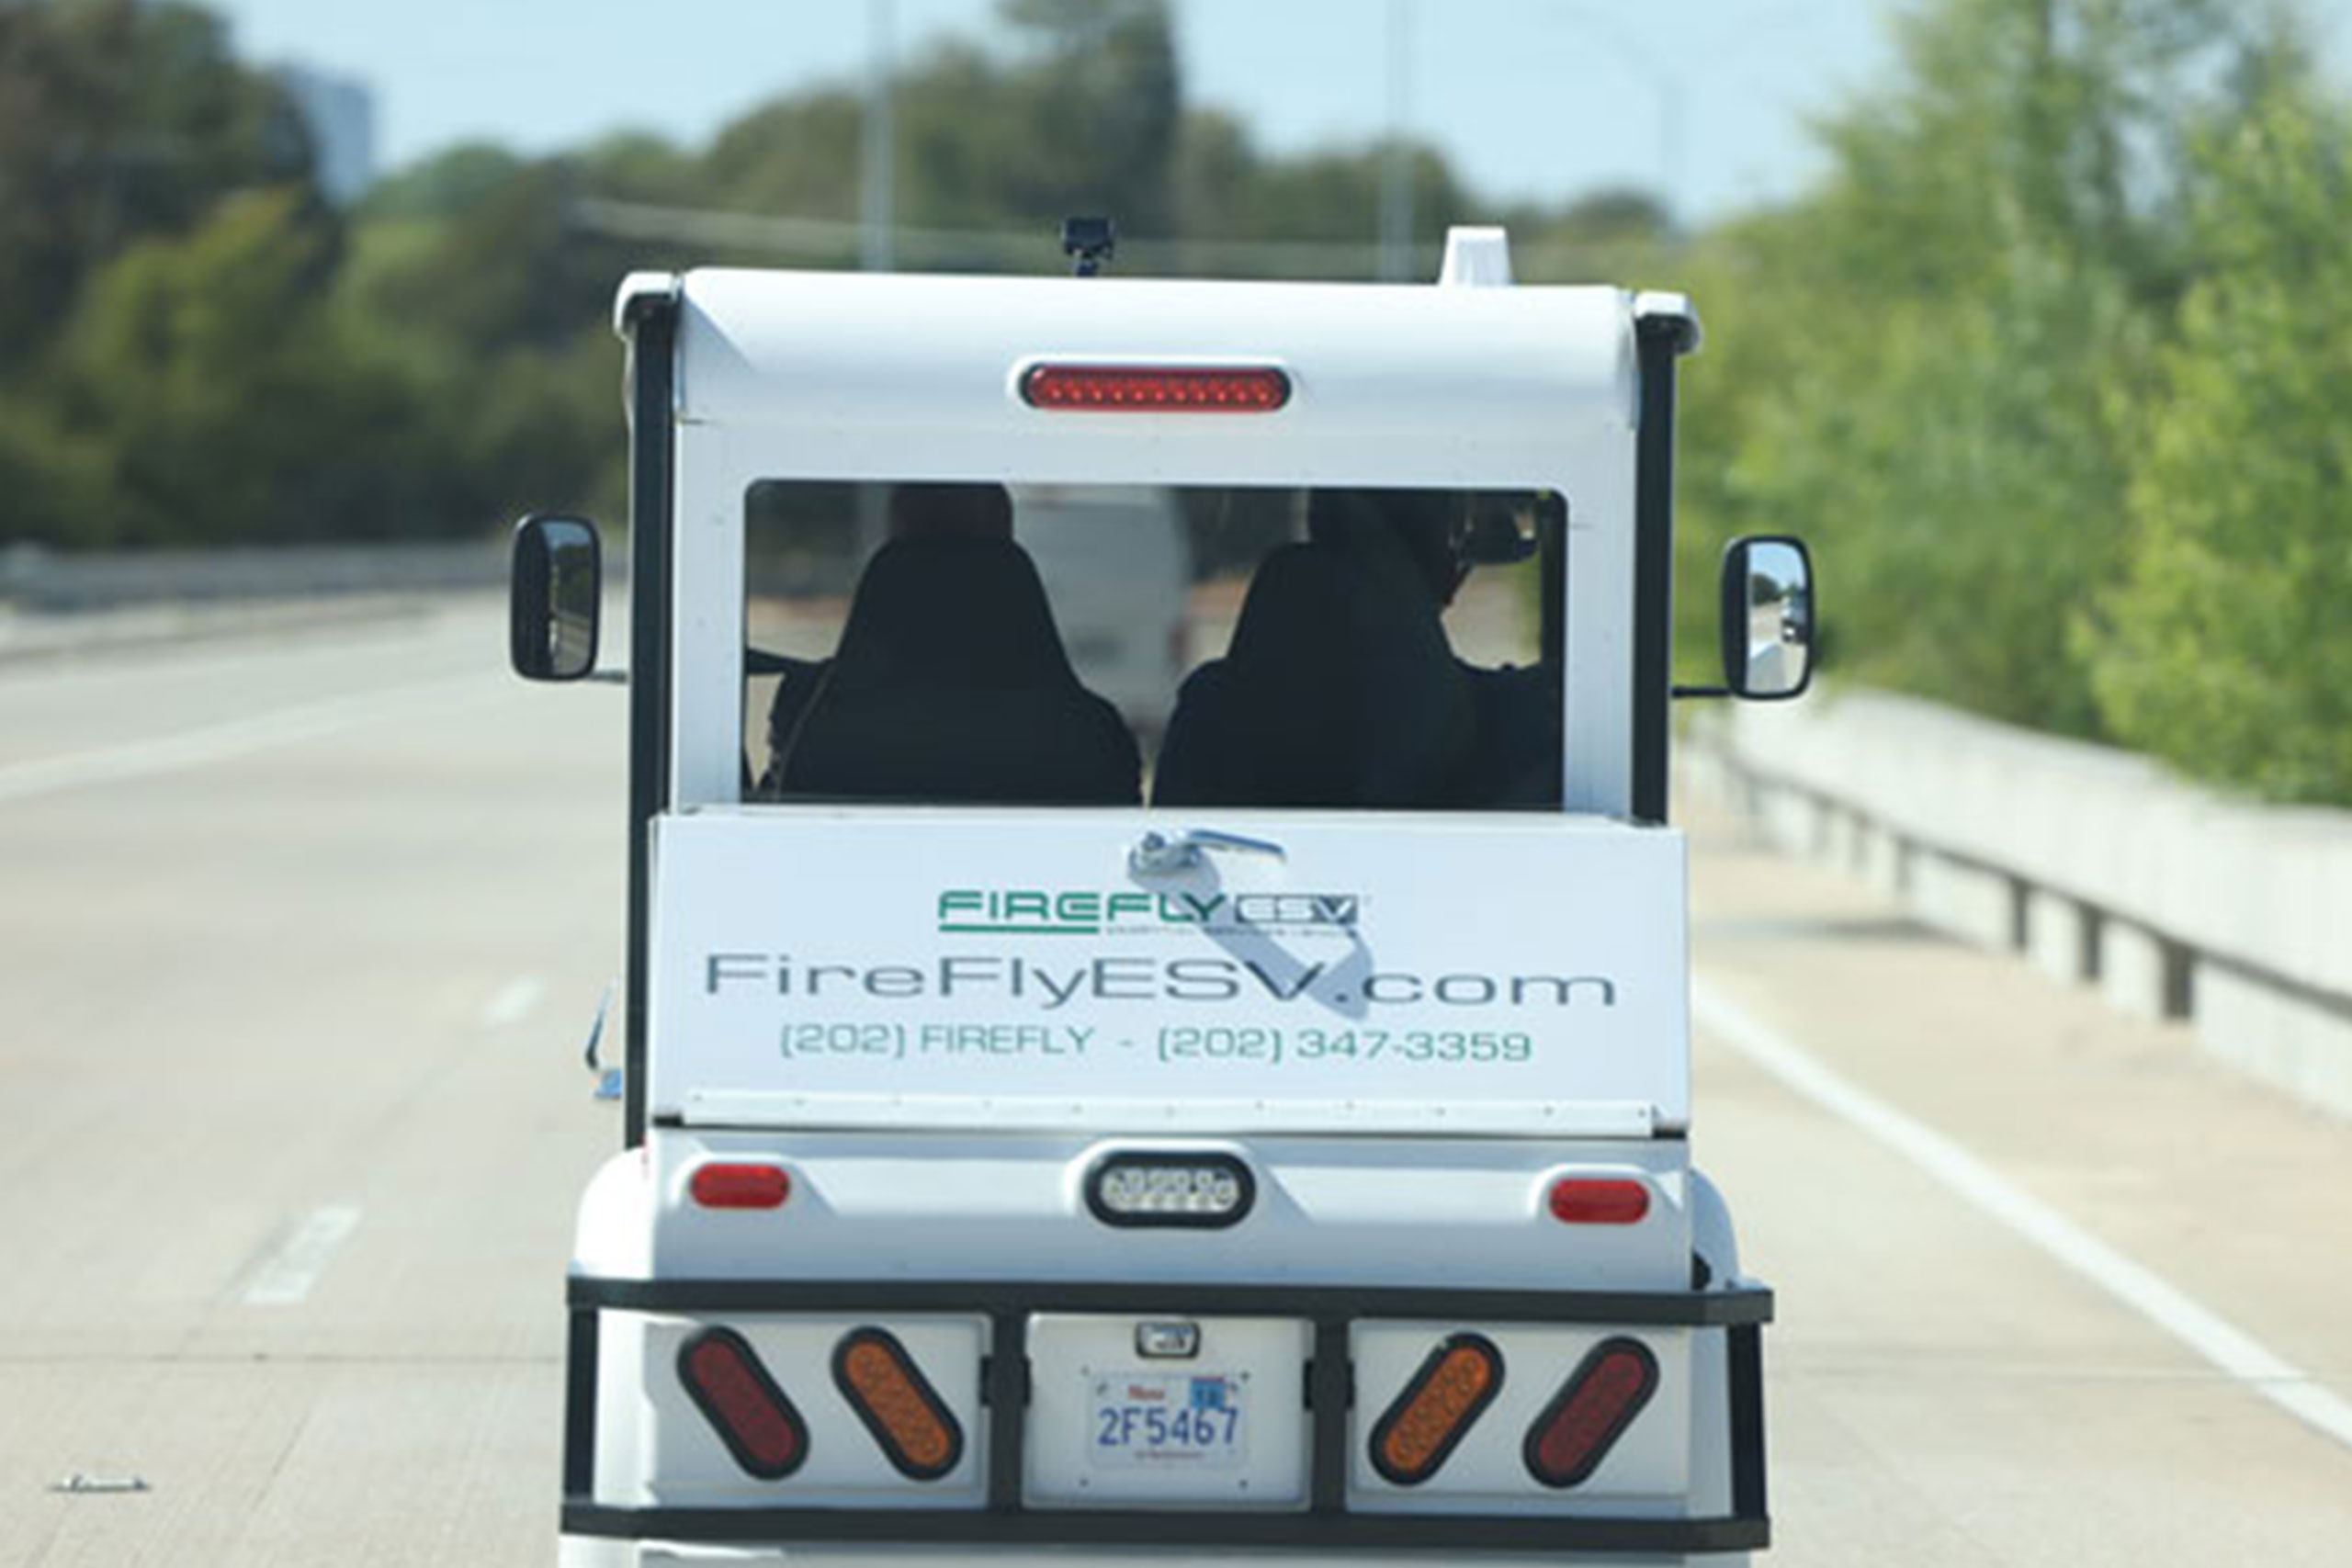 Firefly ESV Electric Commercial Utility Vehicle - American Vet Work